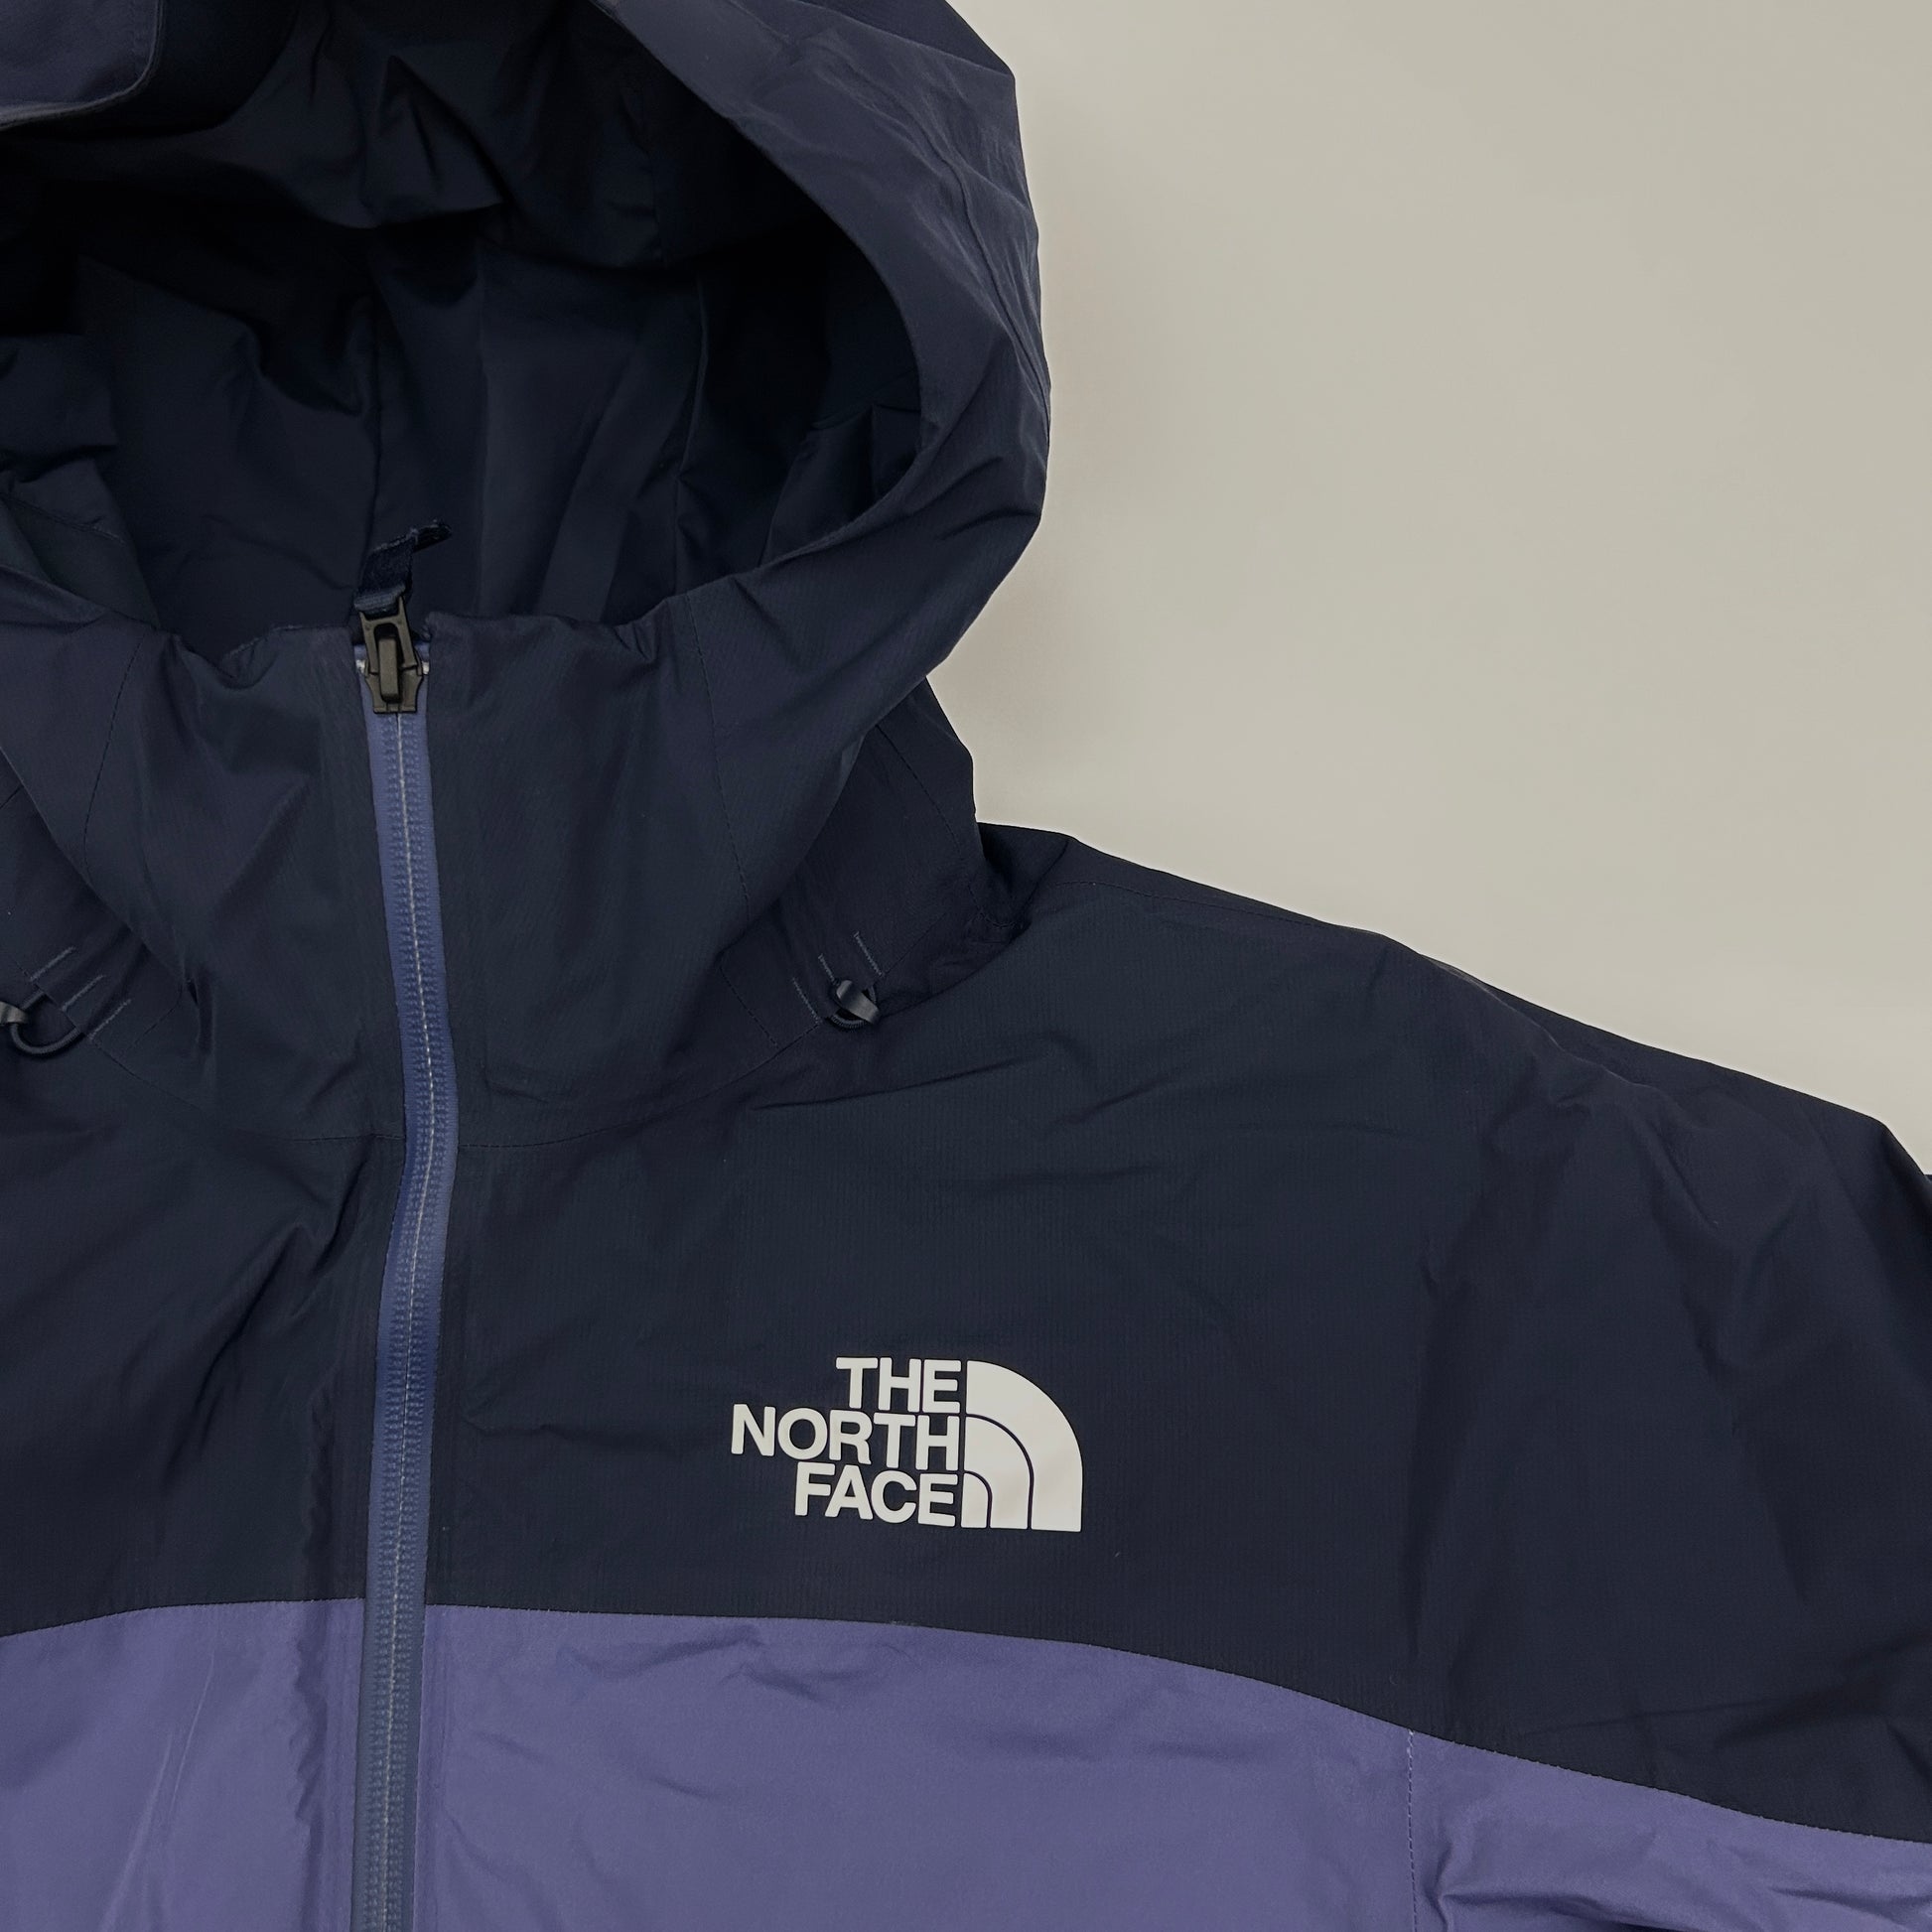 Women's North Face HyVent Triclimate 3 in 1 Jacket